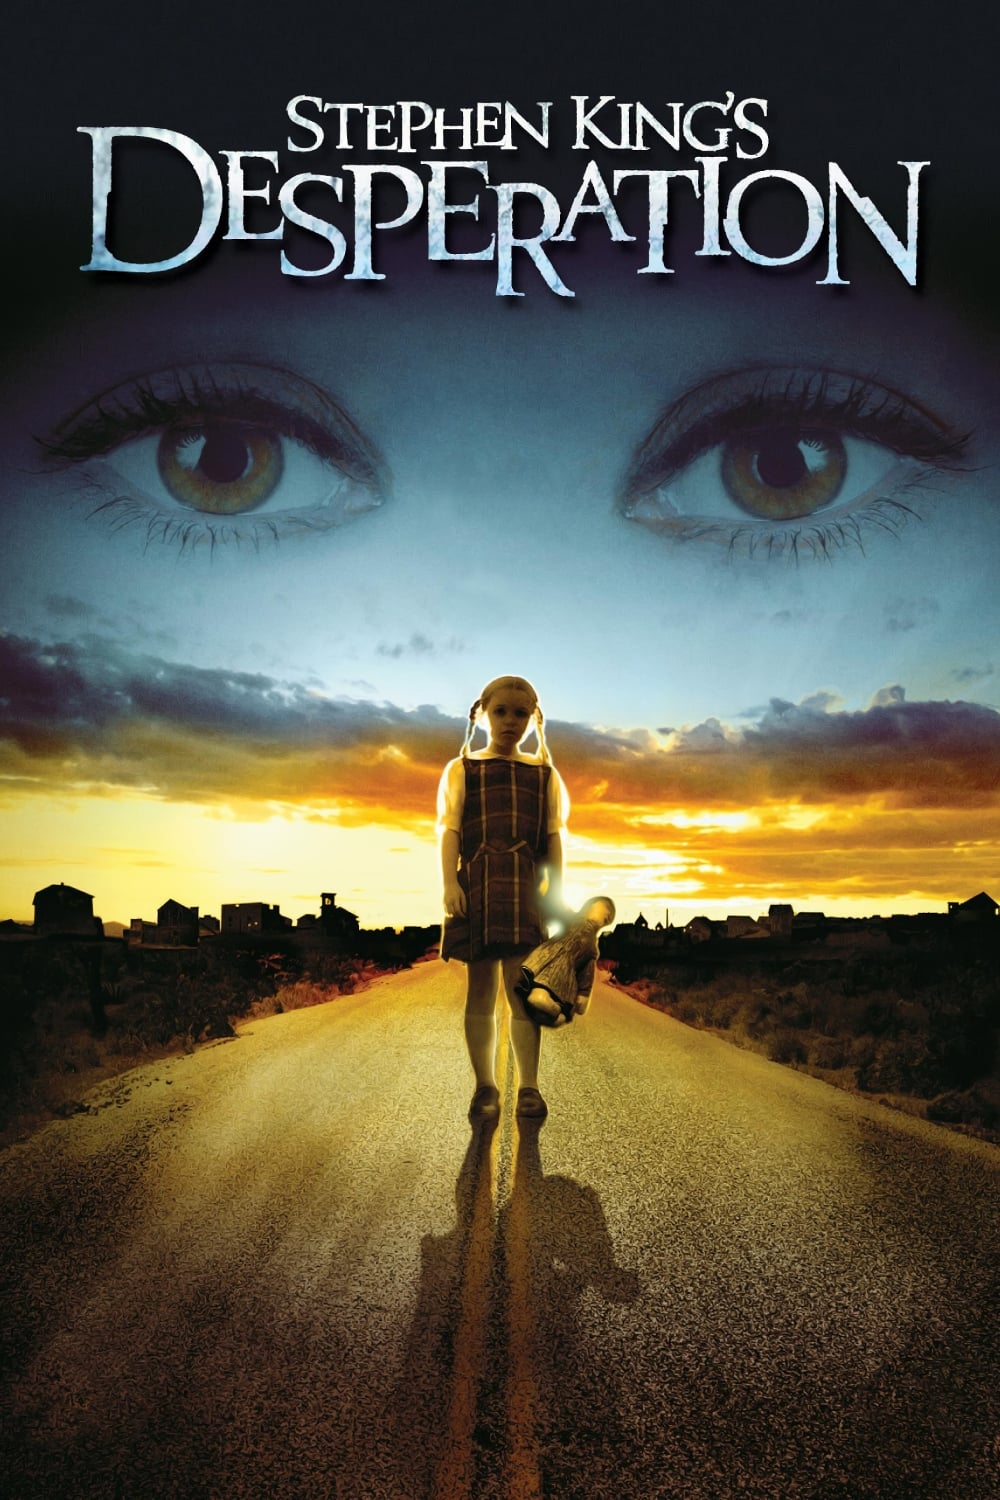 Poster for the movie "Desperation"